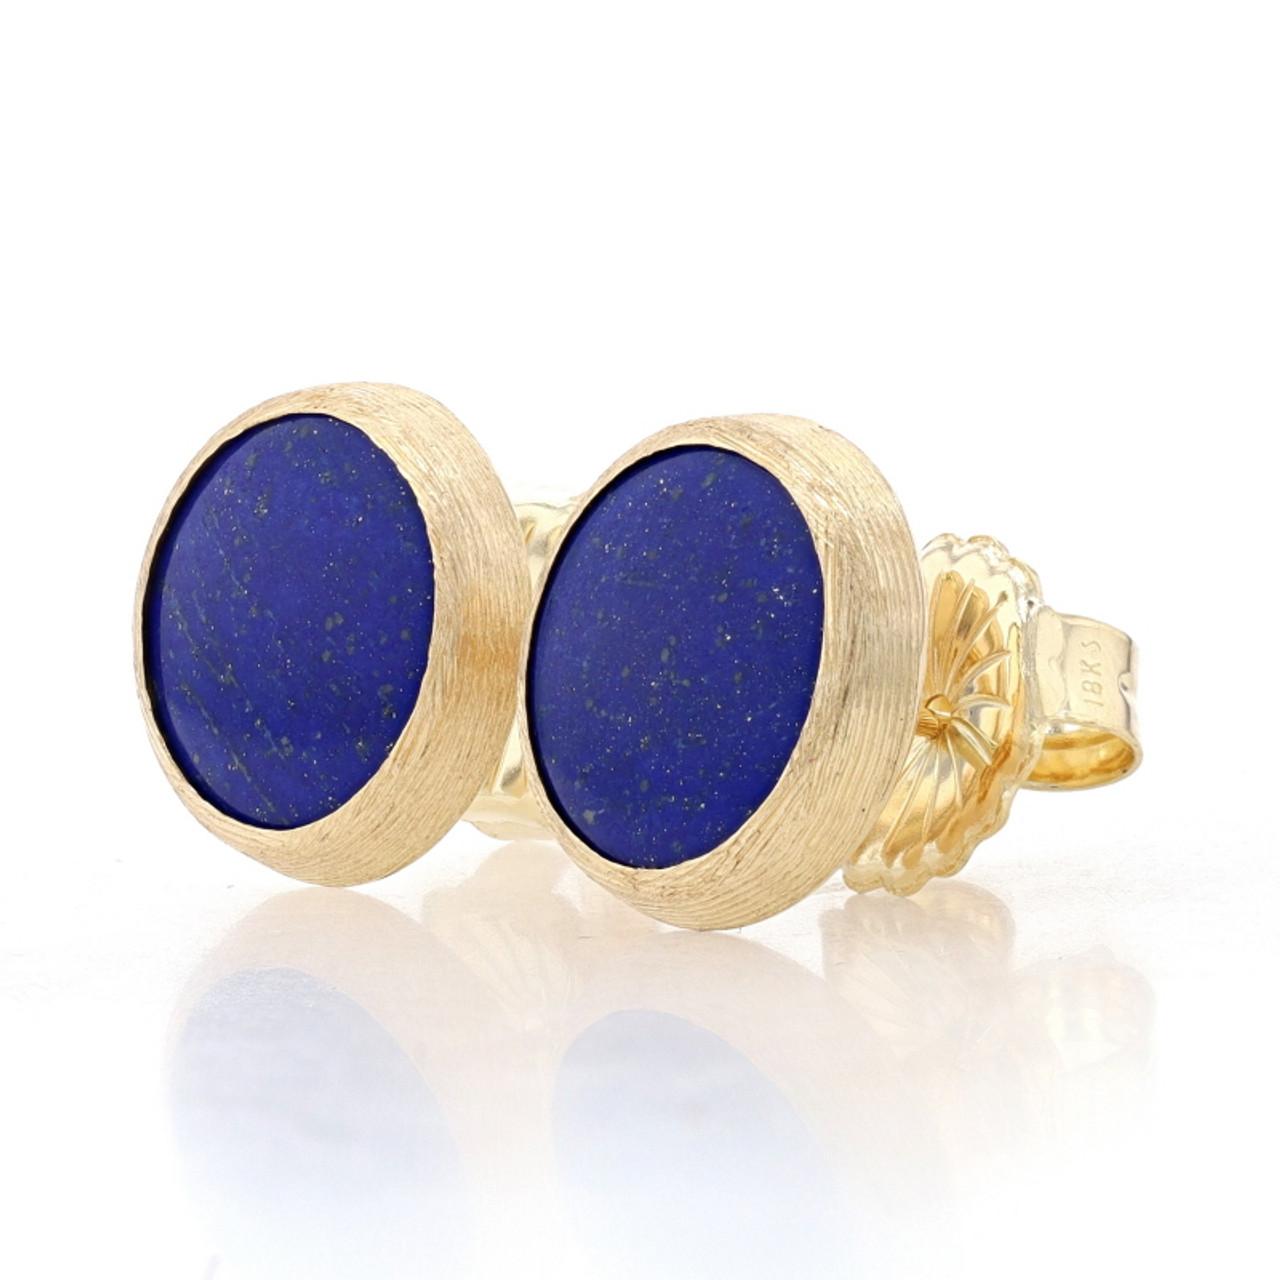 Yellow Gold Lapis Lazuli Large Stud Earrings 18k Brushed Circles Pierced

Stone Information::
Natural Lapis Lazuli
Color: Blue

Additional information:
Material: Metal 18k Yellow Gold
Style: Large Stud
Fastening Type: Butterfly Closures
Theme: